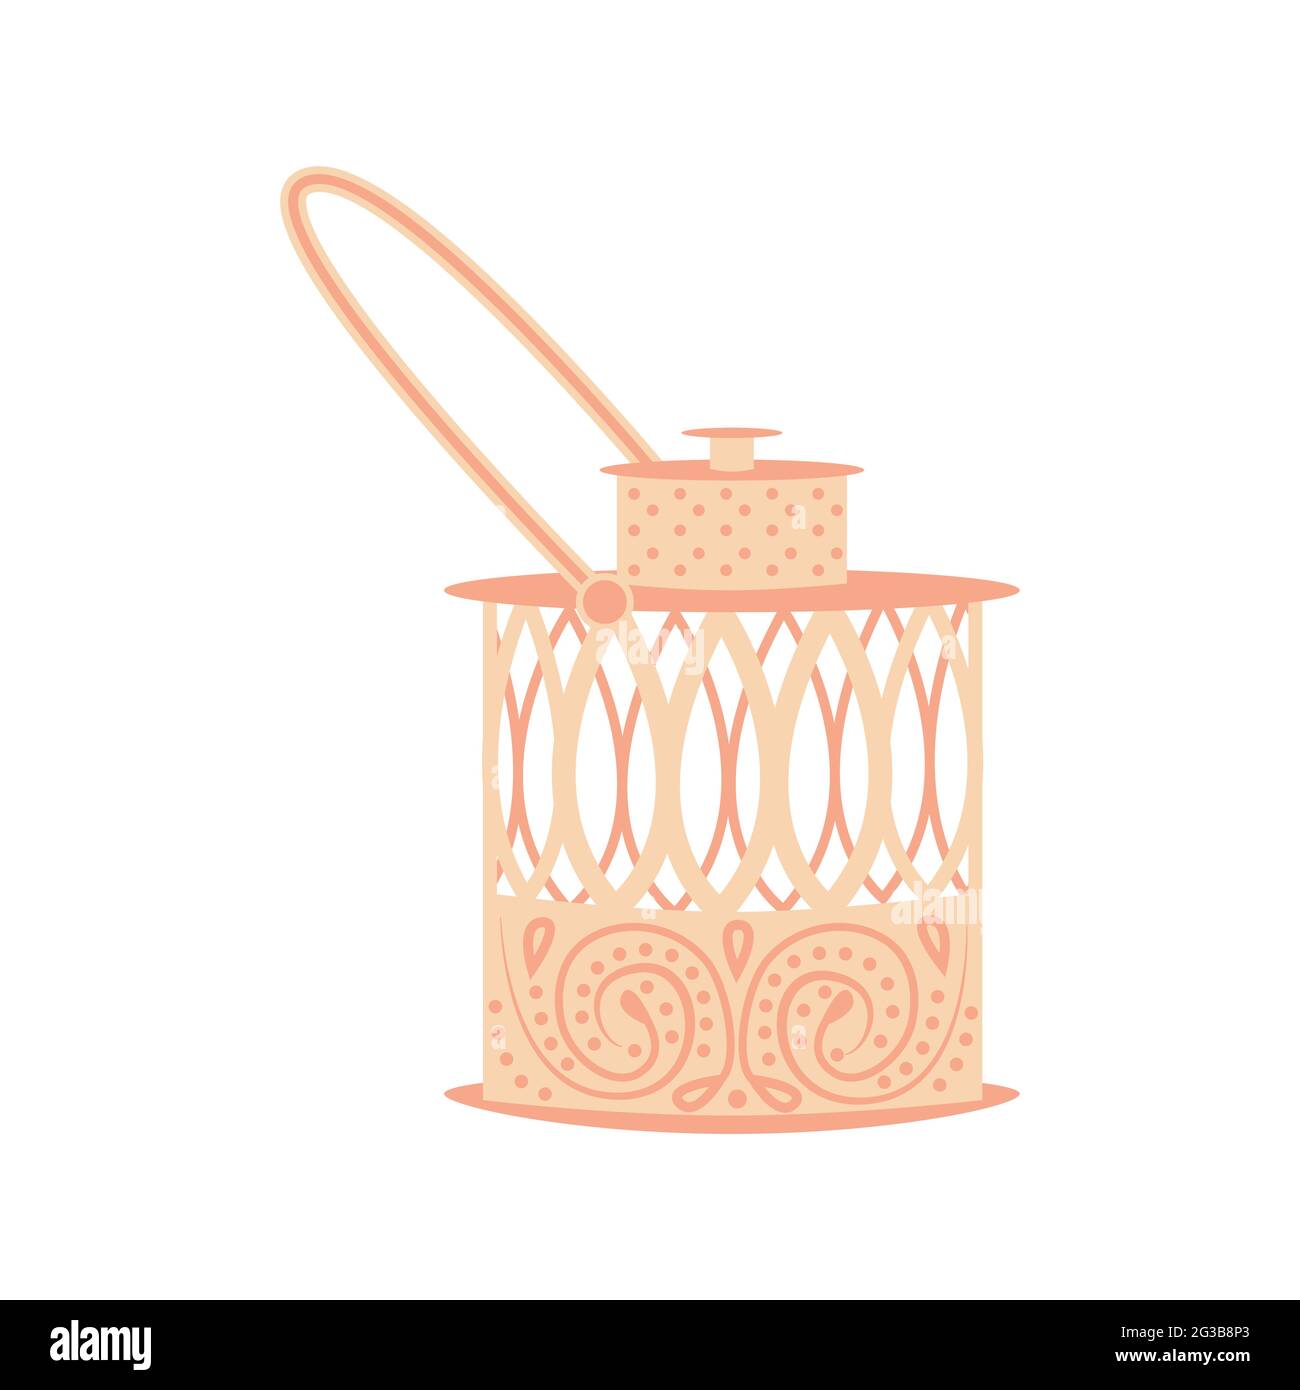 Christmas lantern with a burning candle isolate on a white background. New Year's decor, festive mood. Seth red, gray, white lantern Stock Vector